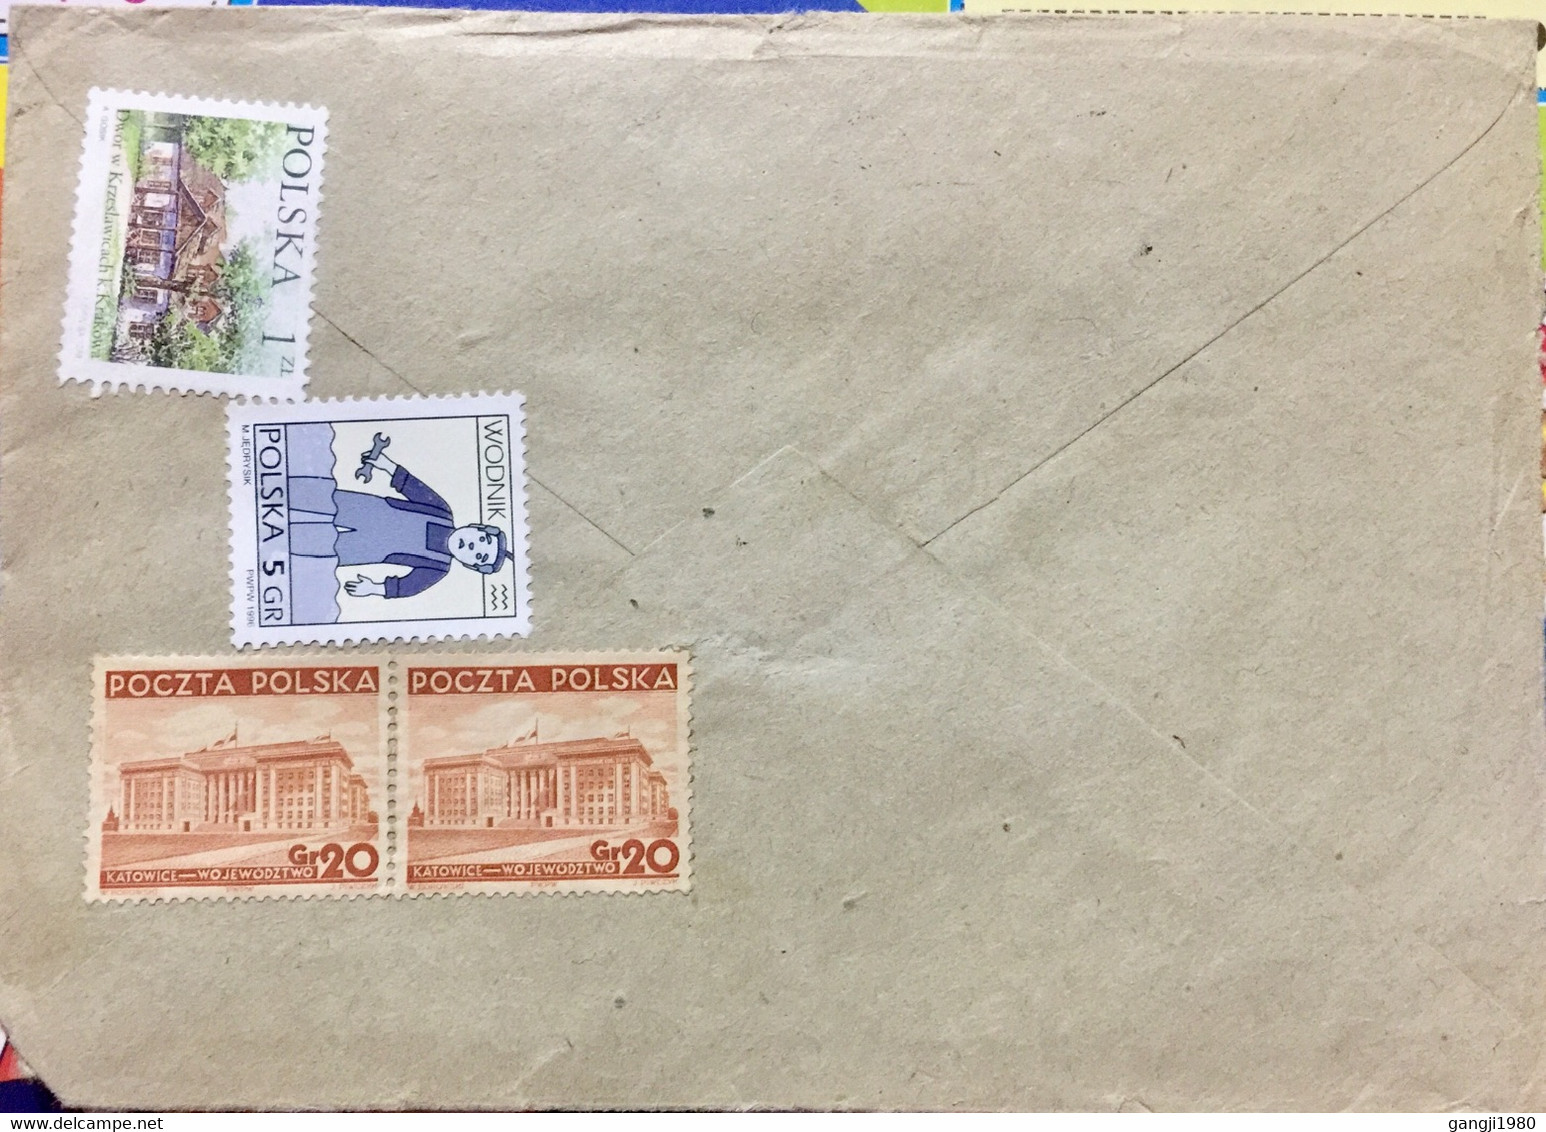 POLAND 2000, USED AIRMAIL COVER TO INDIA 4 DIFFERENT 1958 PICTURAL SPECIAL CANCELLATION, KATOWIDE ,HOUSE MUSIC,BUILDIN, - Brieven En Documenten